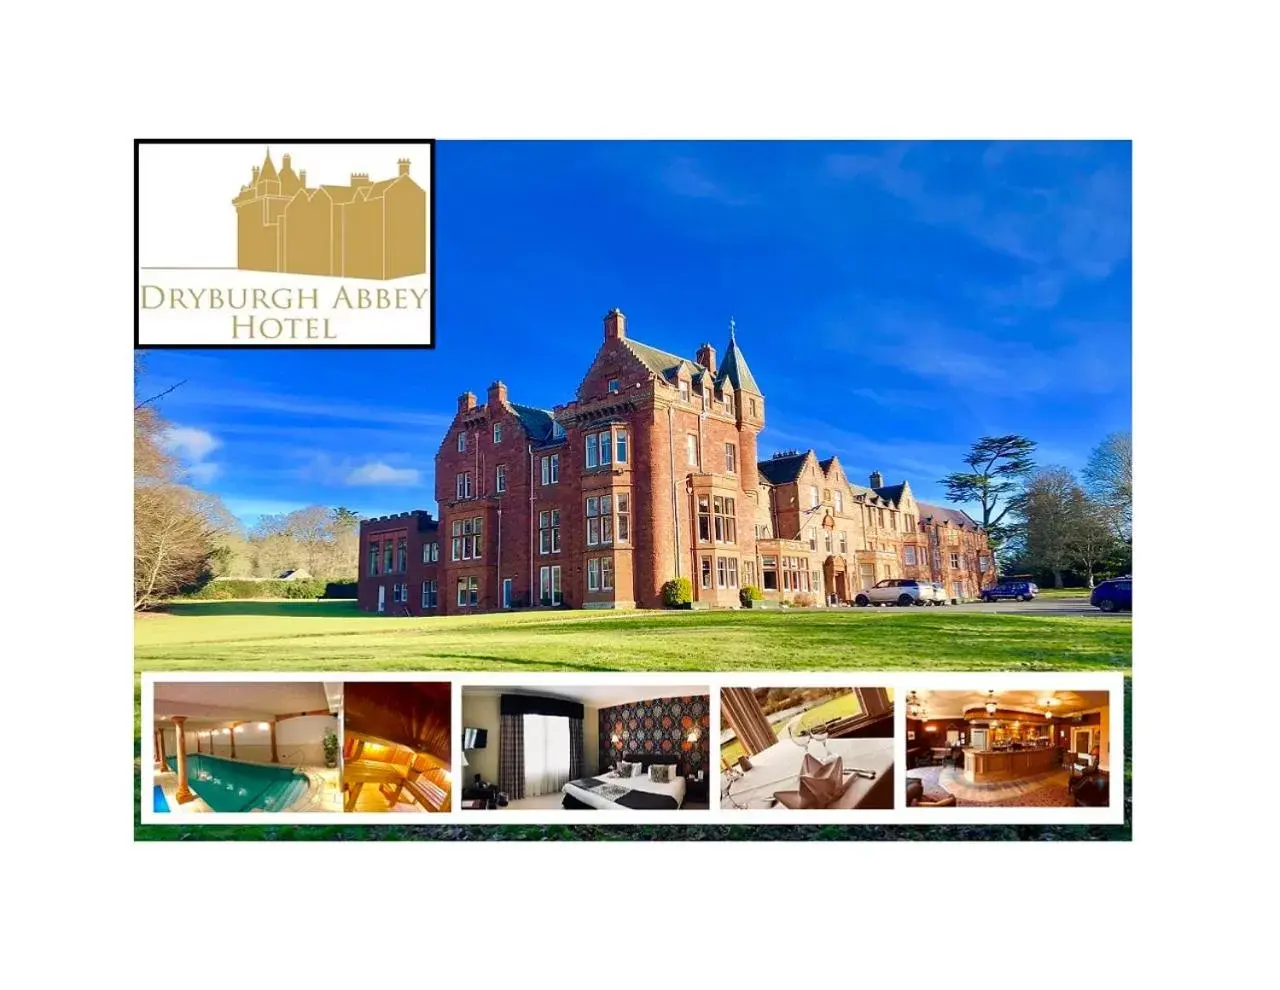 Property building in Dryburgh Abbey Hotel